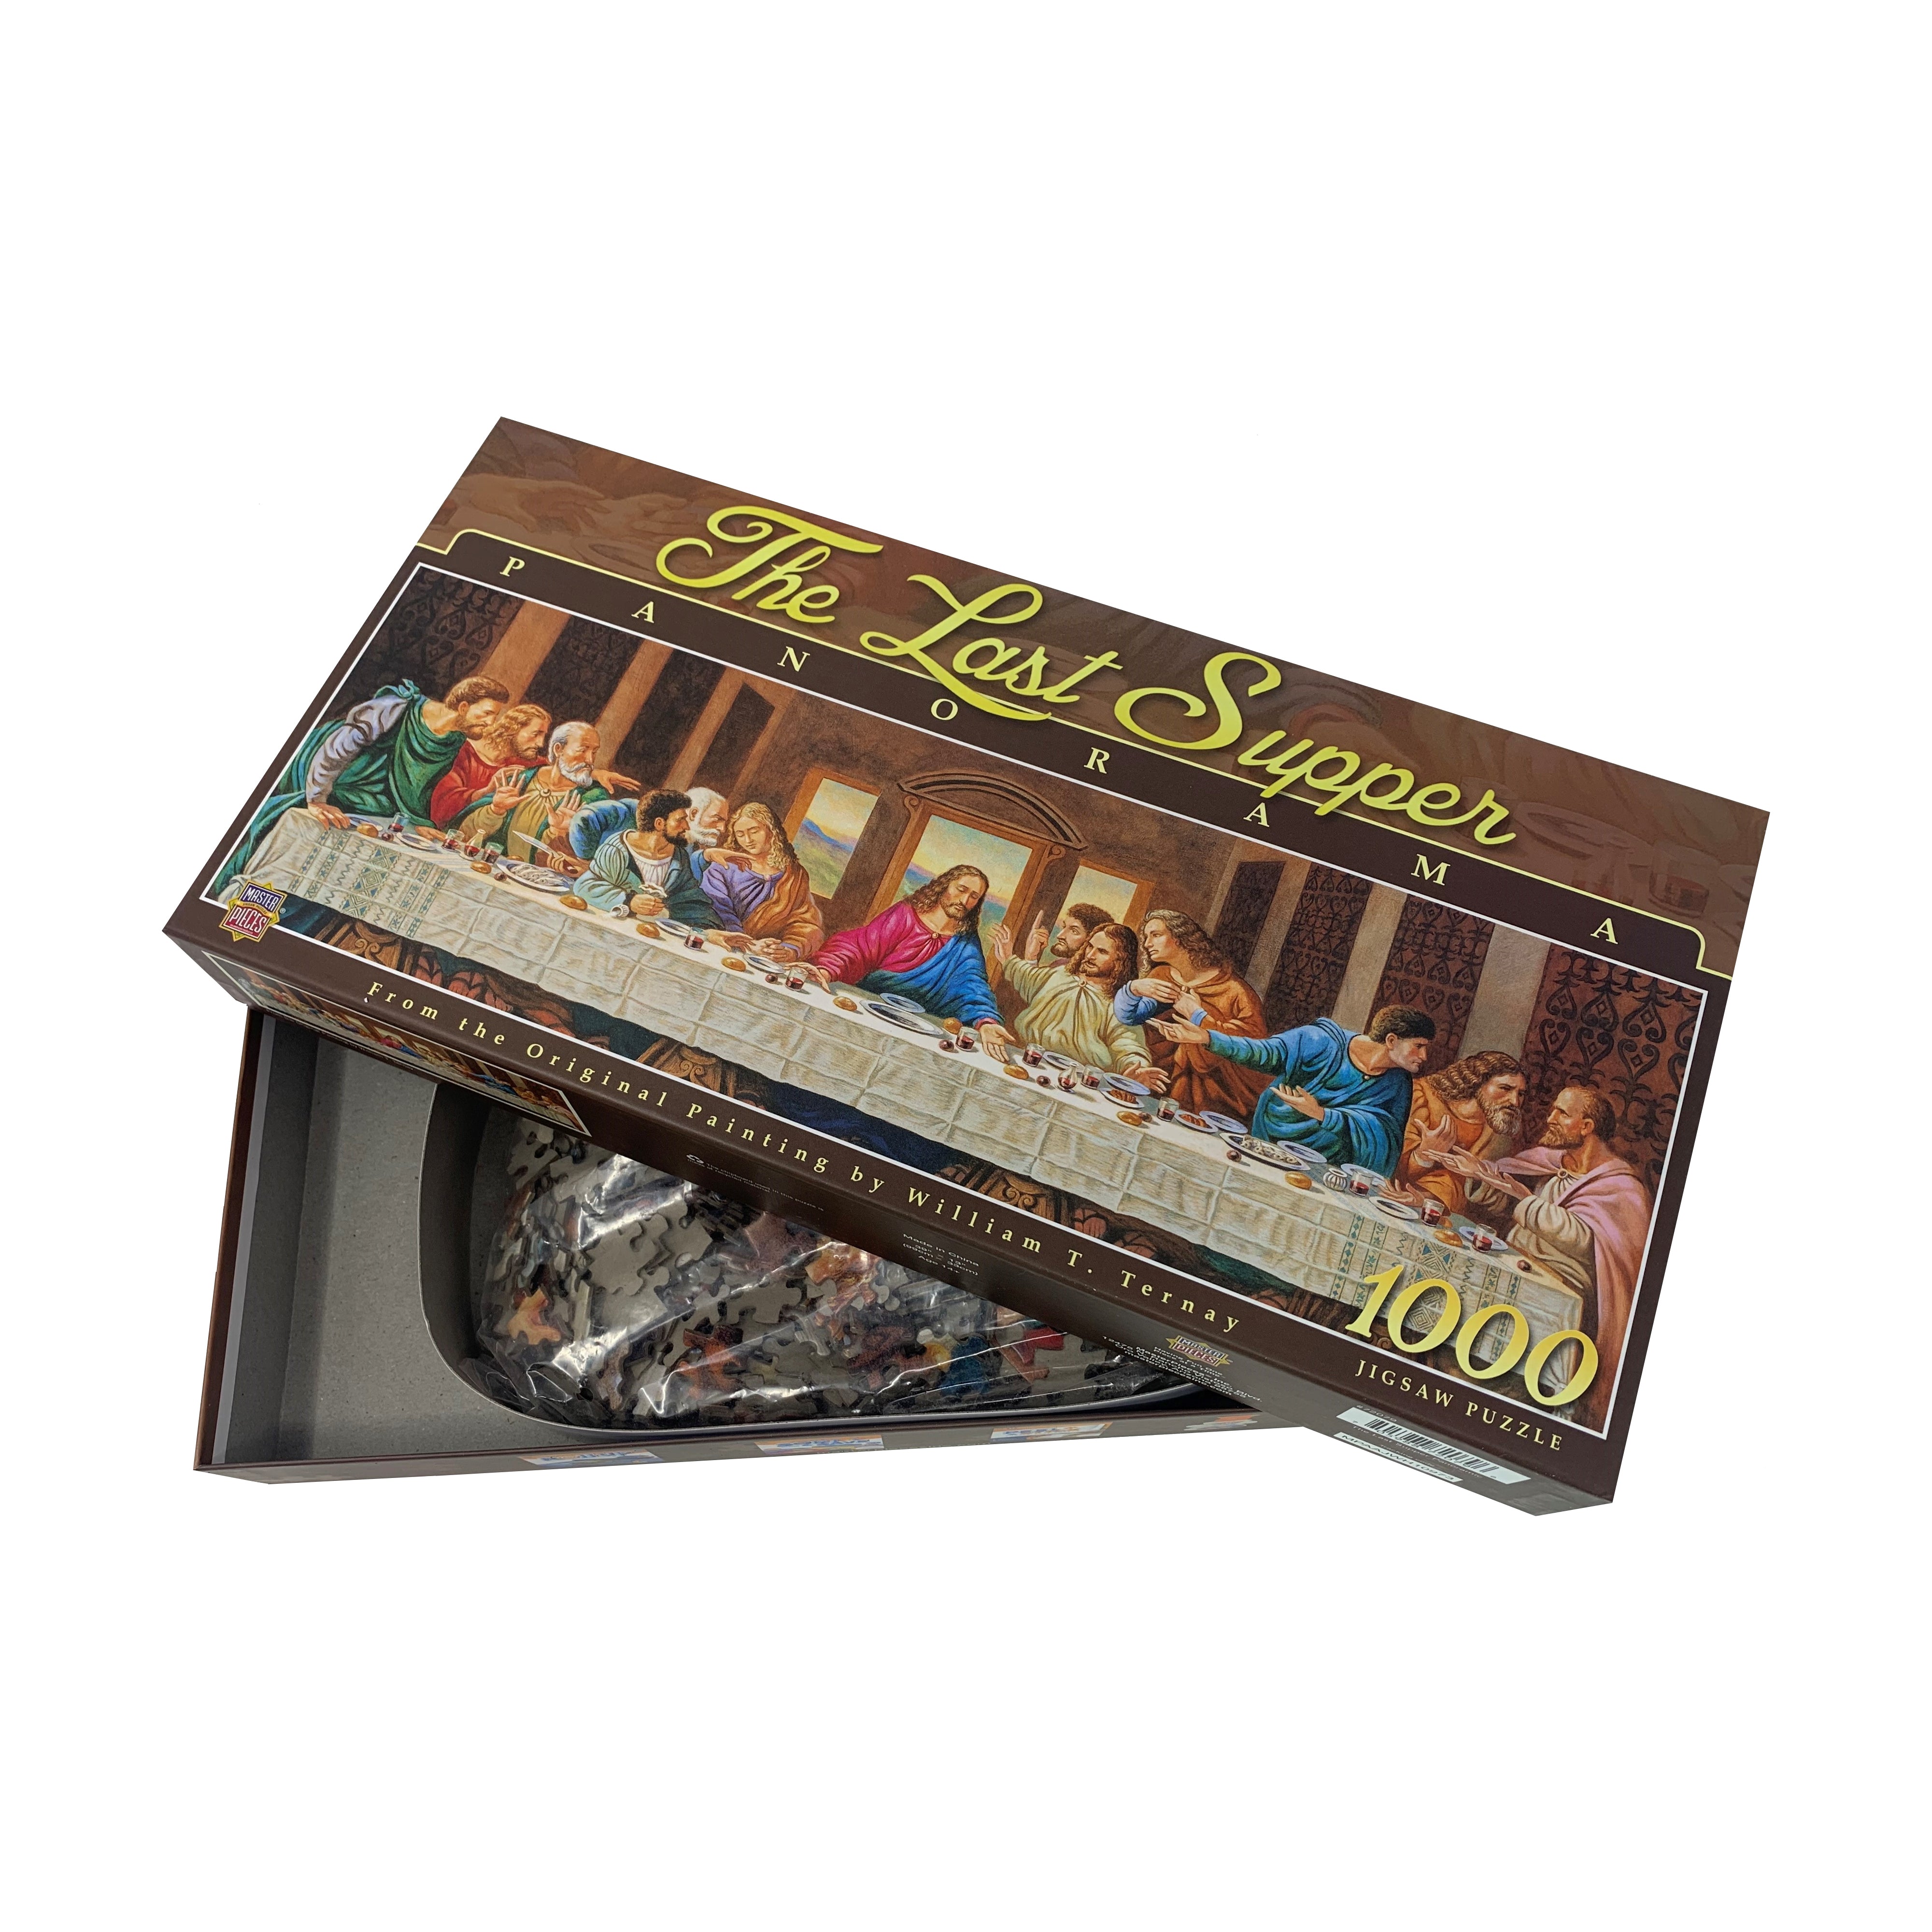 The Last Supper 1000-piece Jigsaw Puzzle